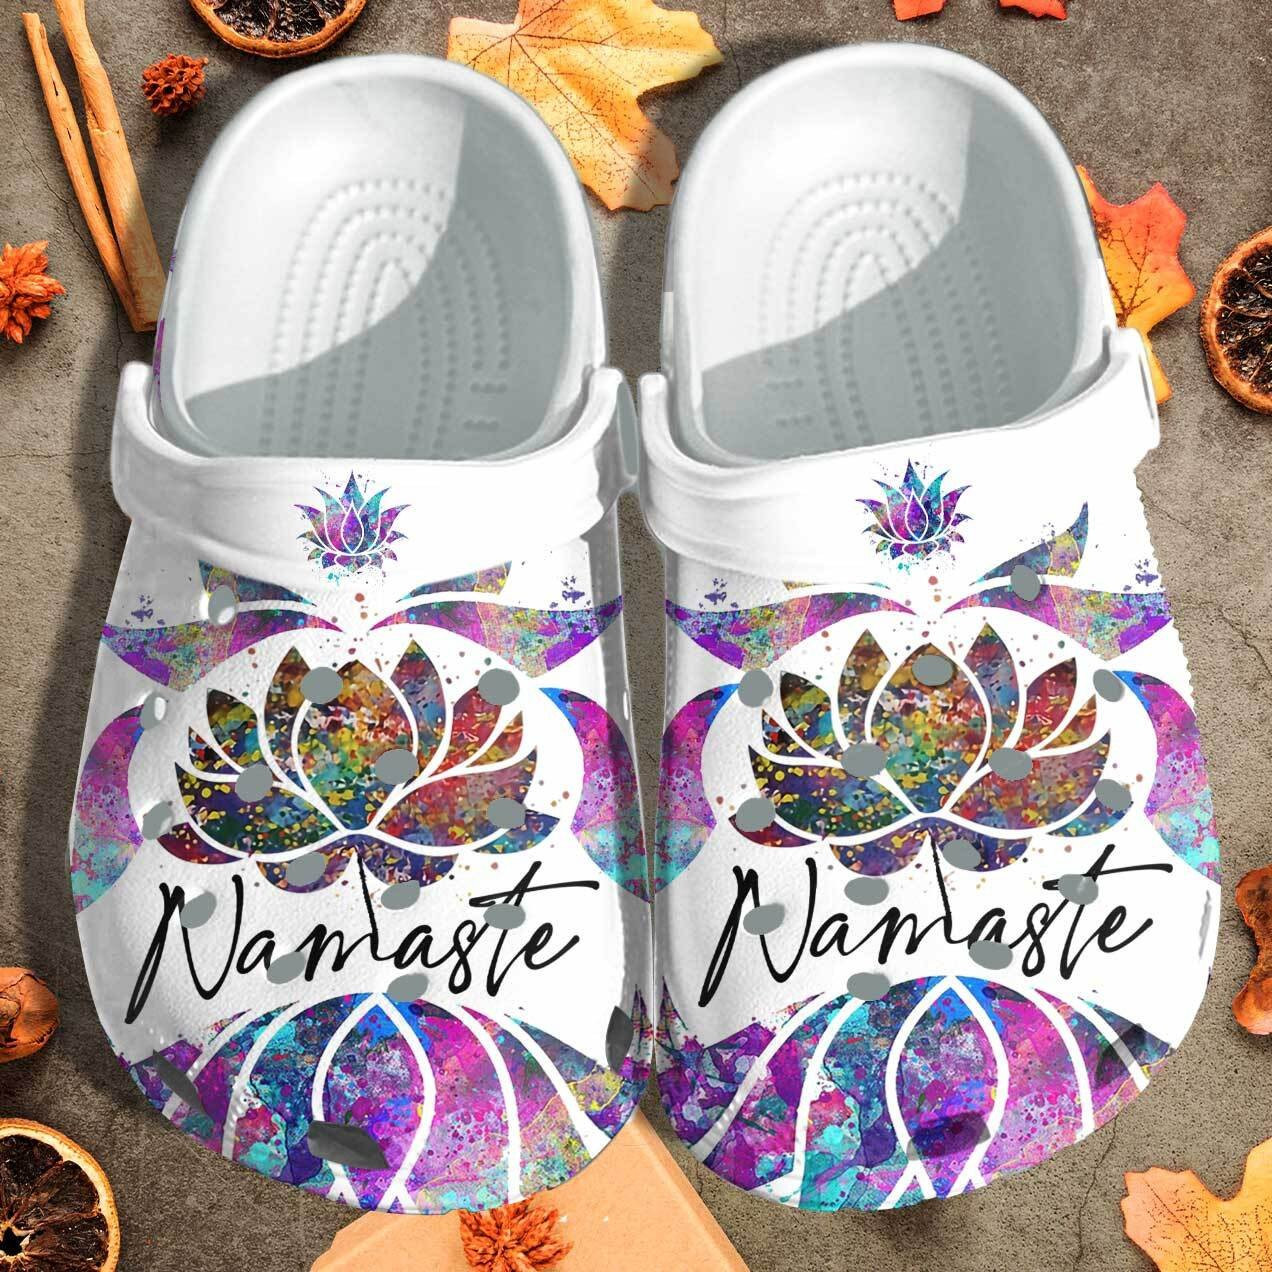 Namaste Lotus Yoga Shoes Clogs - Love Light And Peace Crocs Birthday Gift For Women